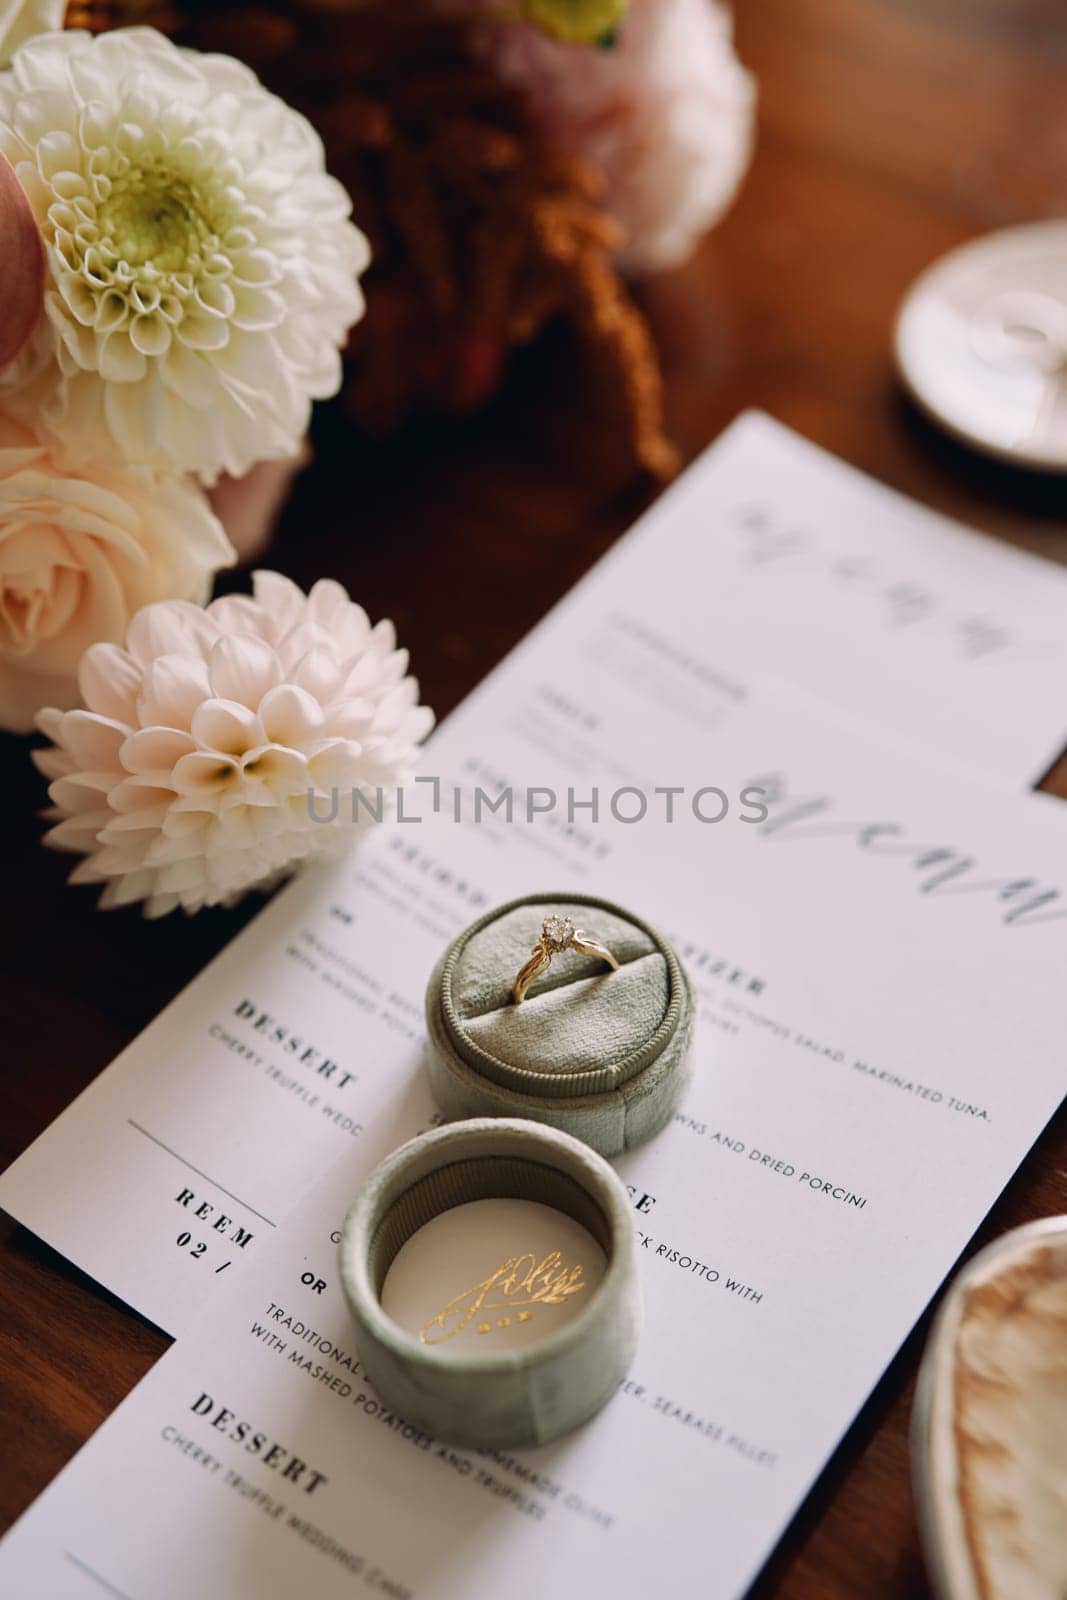 Engagement ring in a box lies on a holiday menu near flowers. High quality photo